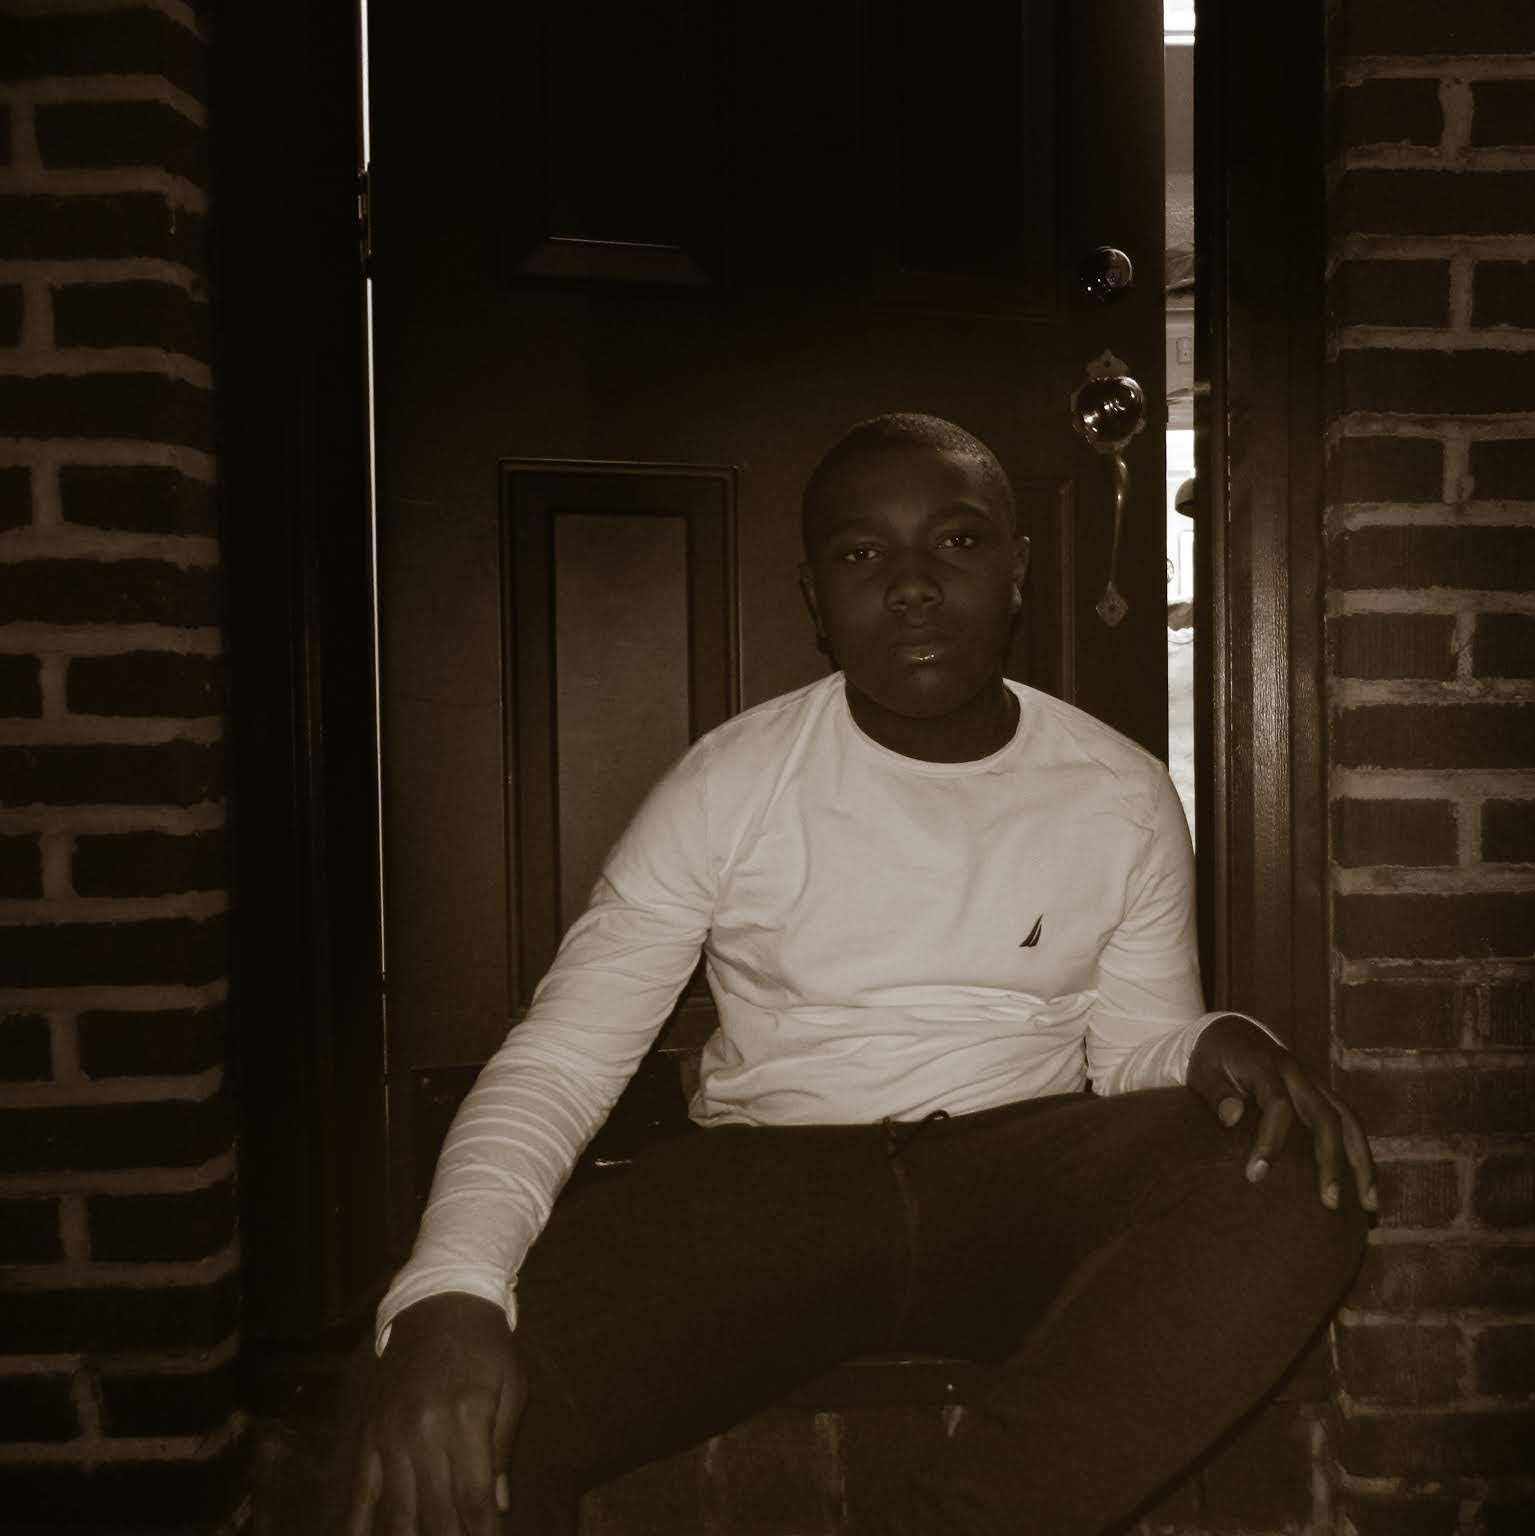 A sepia-toned self-portrait of me; I’m sitting down in front of a door.